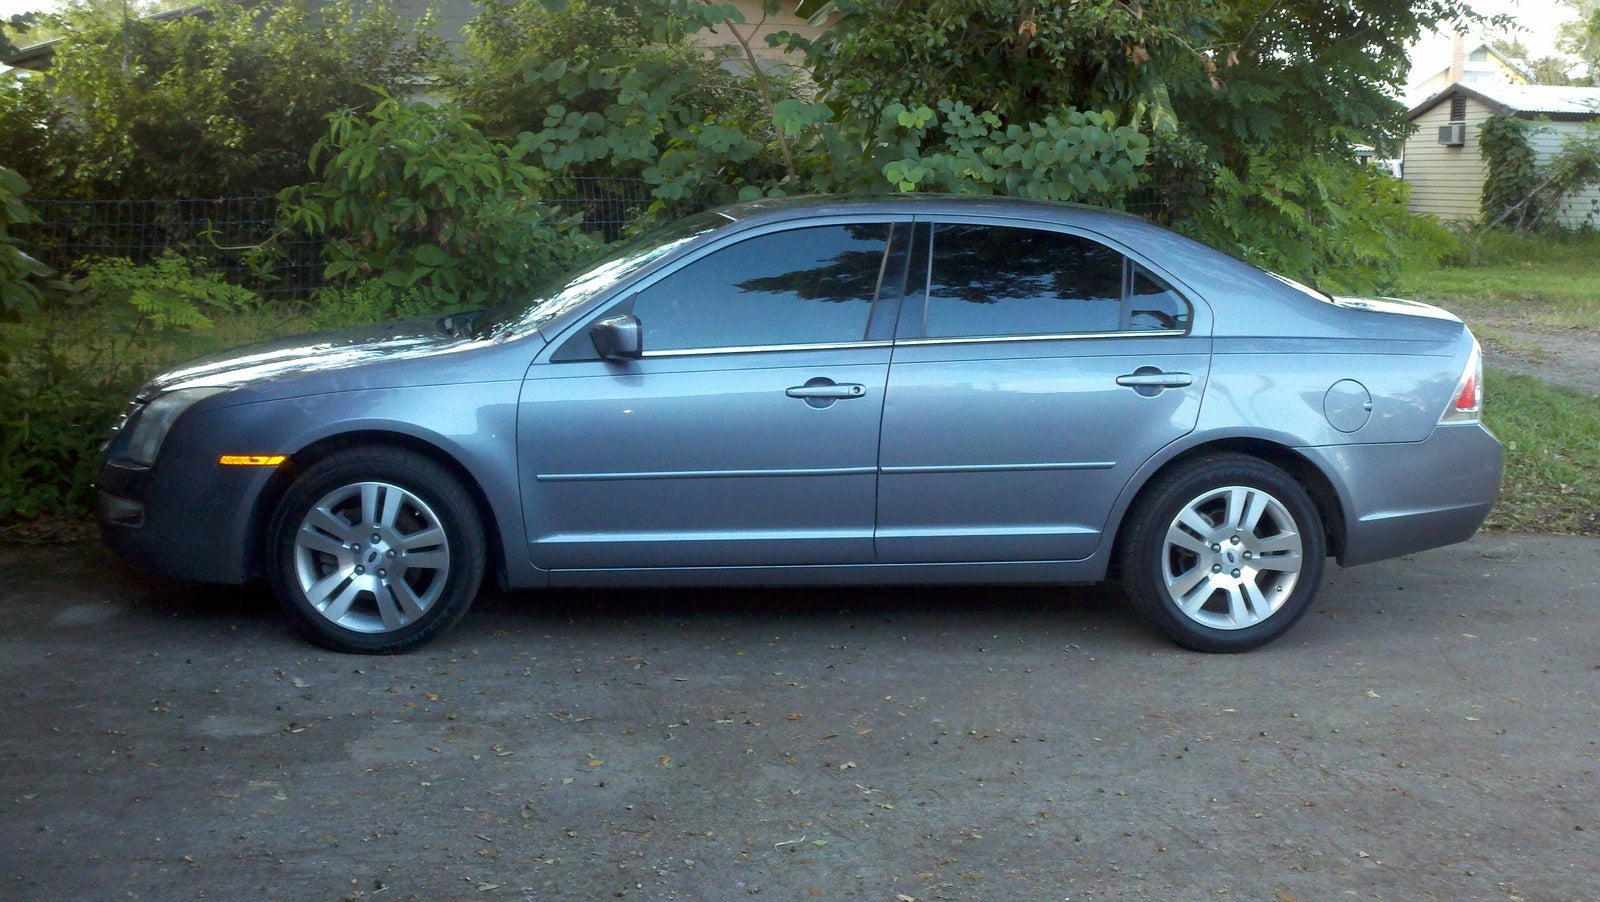 2006 Ford fusion manual review